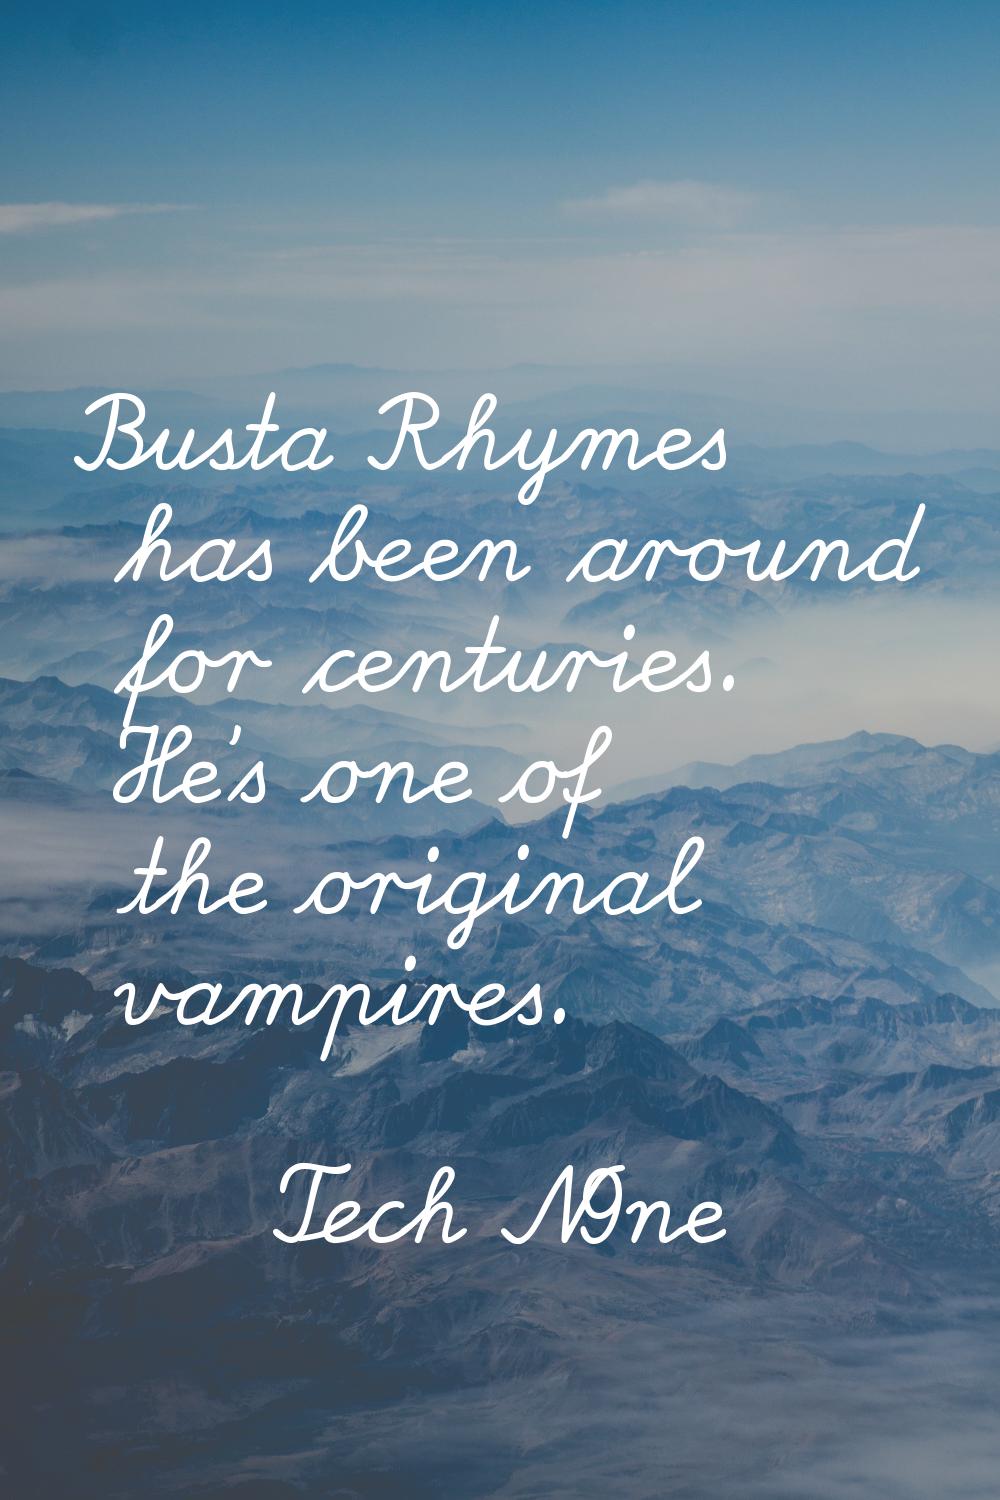 Busta Rhymes has been around for centuries. He's one of the original vampires.